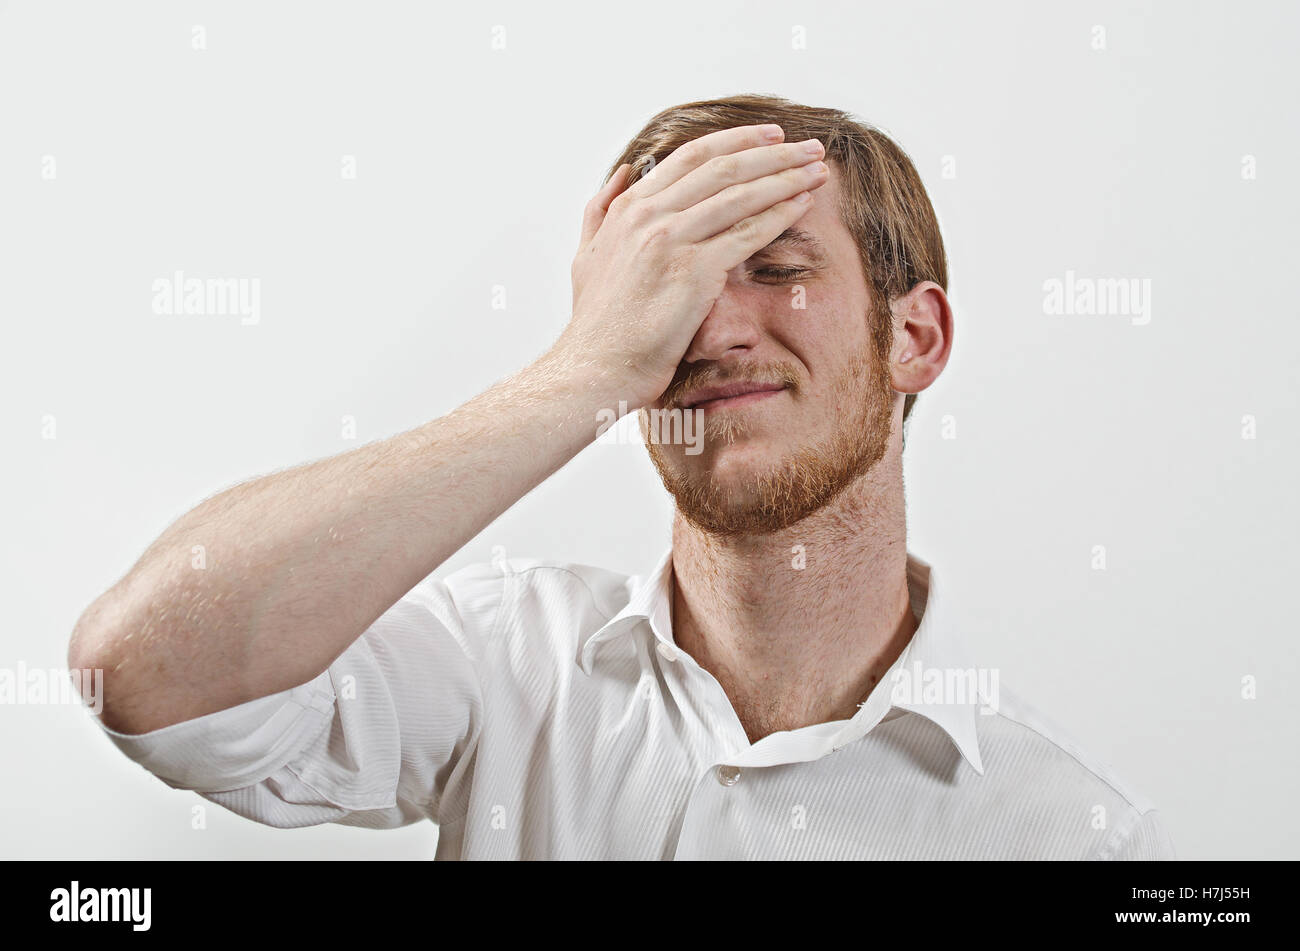 Young Adult Male Wearing White Shirt  Covers His Face by Hand, Gesturing He Has Made a Big Mistake Stock Photo